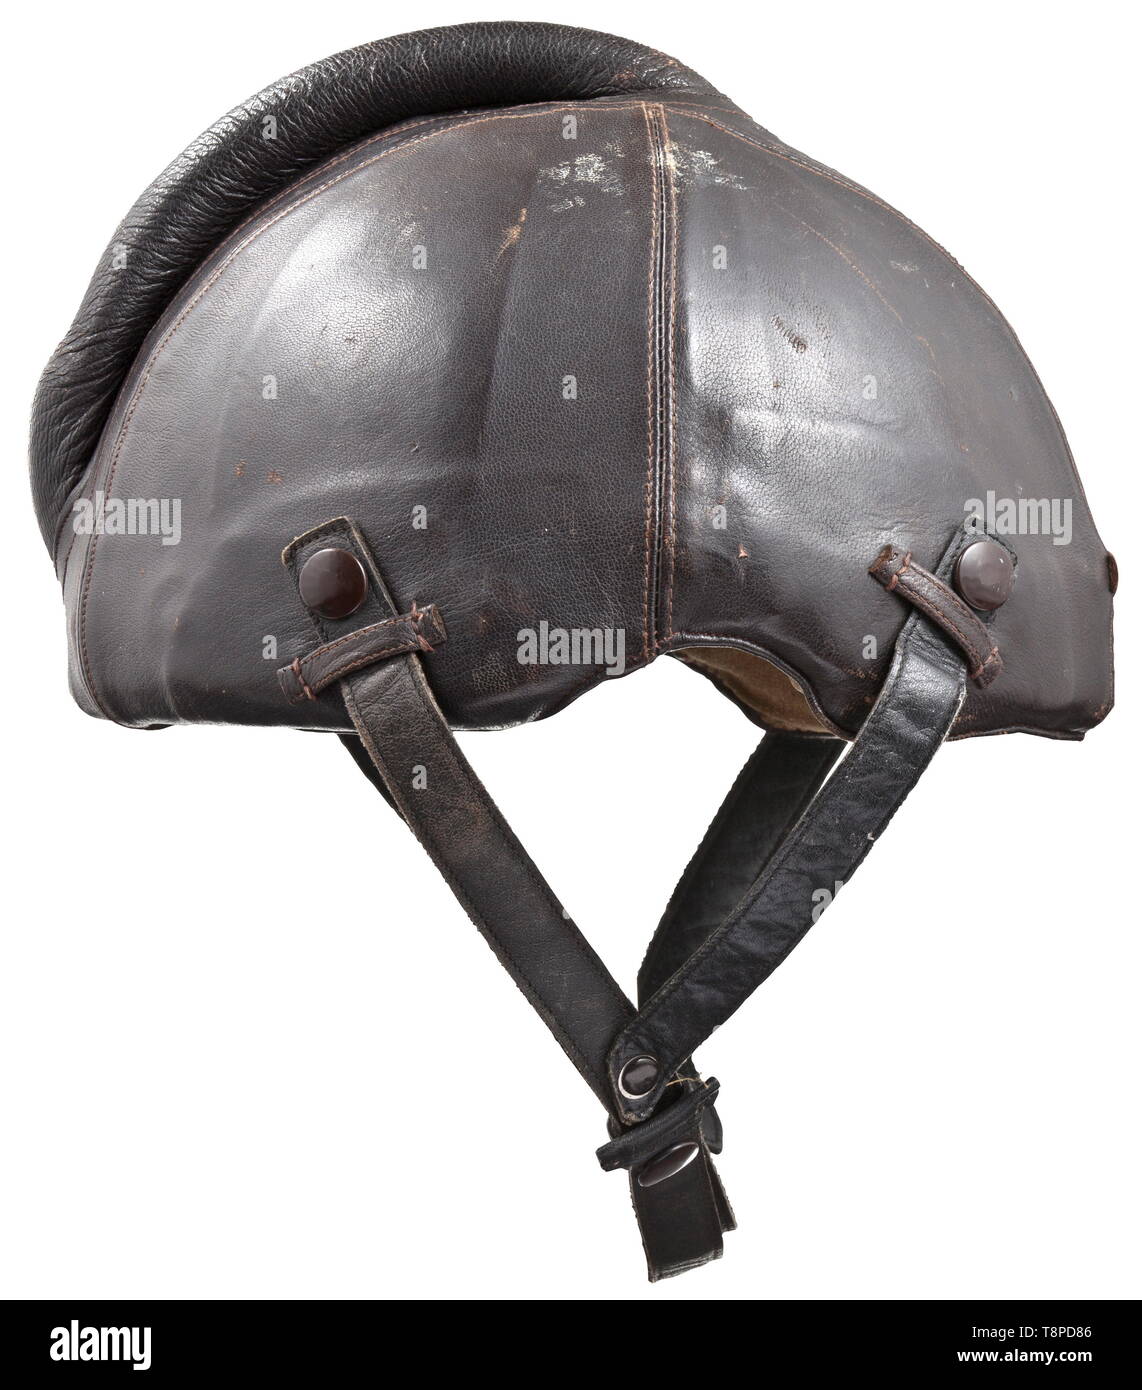 A steel flight helmet Baumuster SSK 90 Skull of riveted steel plates with brown leather cover, protective bulge sewn and padded, attachment loops. Chinstraps of a different colour, with press button attachment. The lining made from the same sand-coloured mottled linen as the flying suits, with sewn maker's label 'Siemens - Baumuster SSK 90 - Hersteller Luftfahrtgerätewerk Hakenfelde GMBH - Striwa - Kopfgröße 60-62' (tr. 'Siemens - model SSK 90 - manufacturer Luftfahrtgerätewerk Hakenfelde GMBH - Striwa - head size 60-62'). historic, historical, Air Force, branch of service,, Editorial-Use-Only Stock Photo